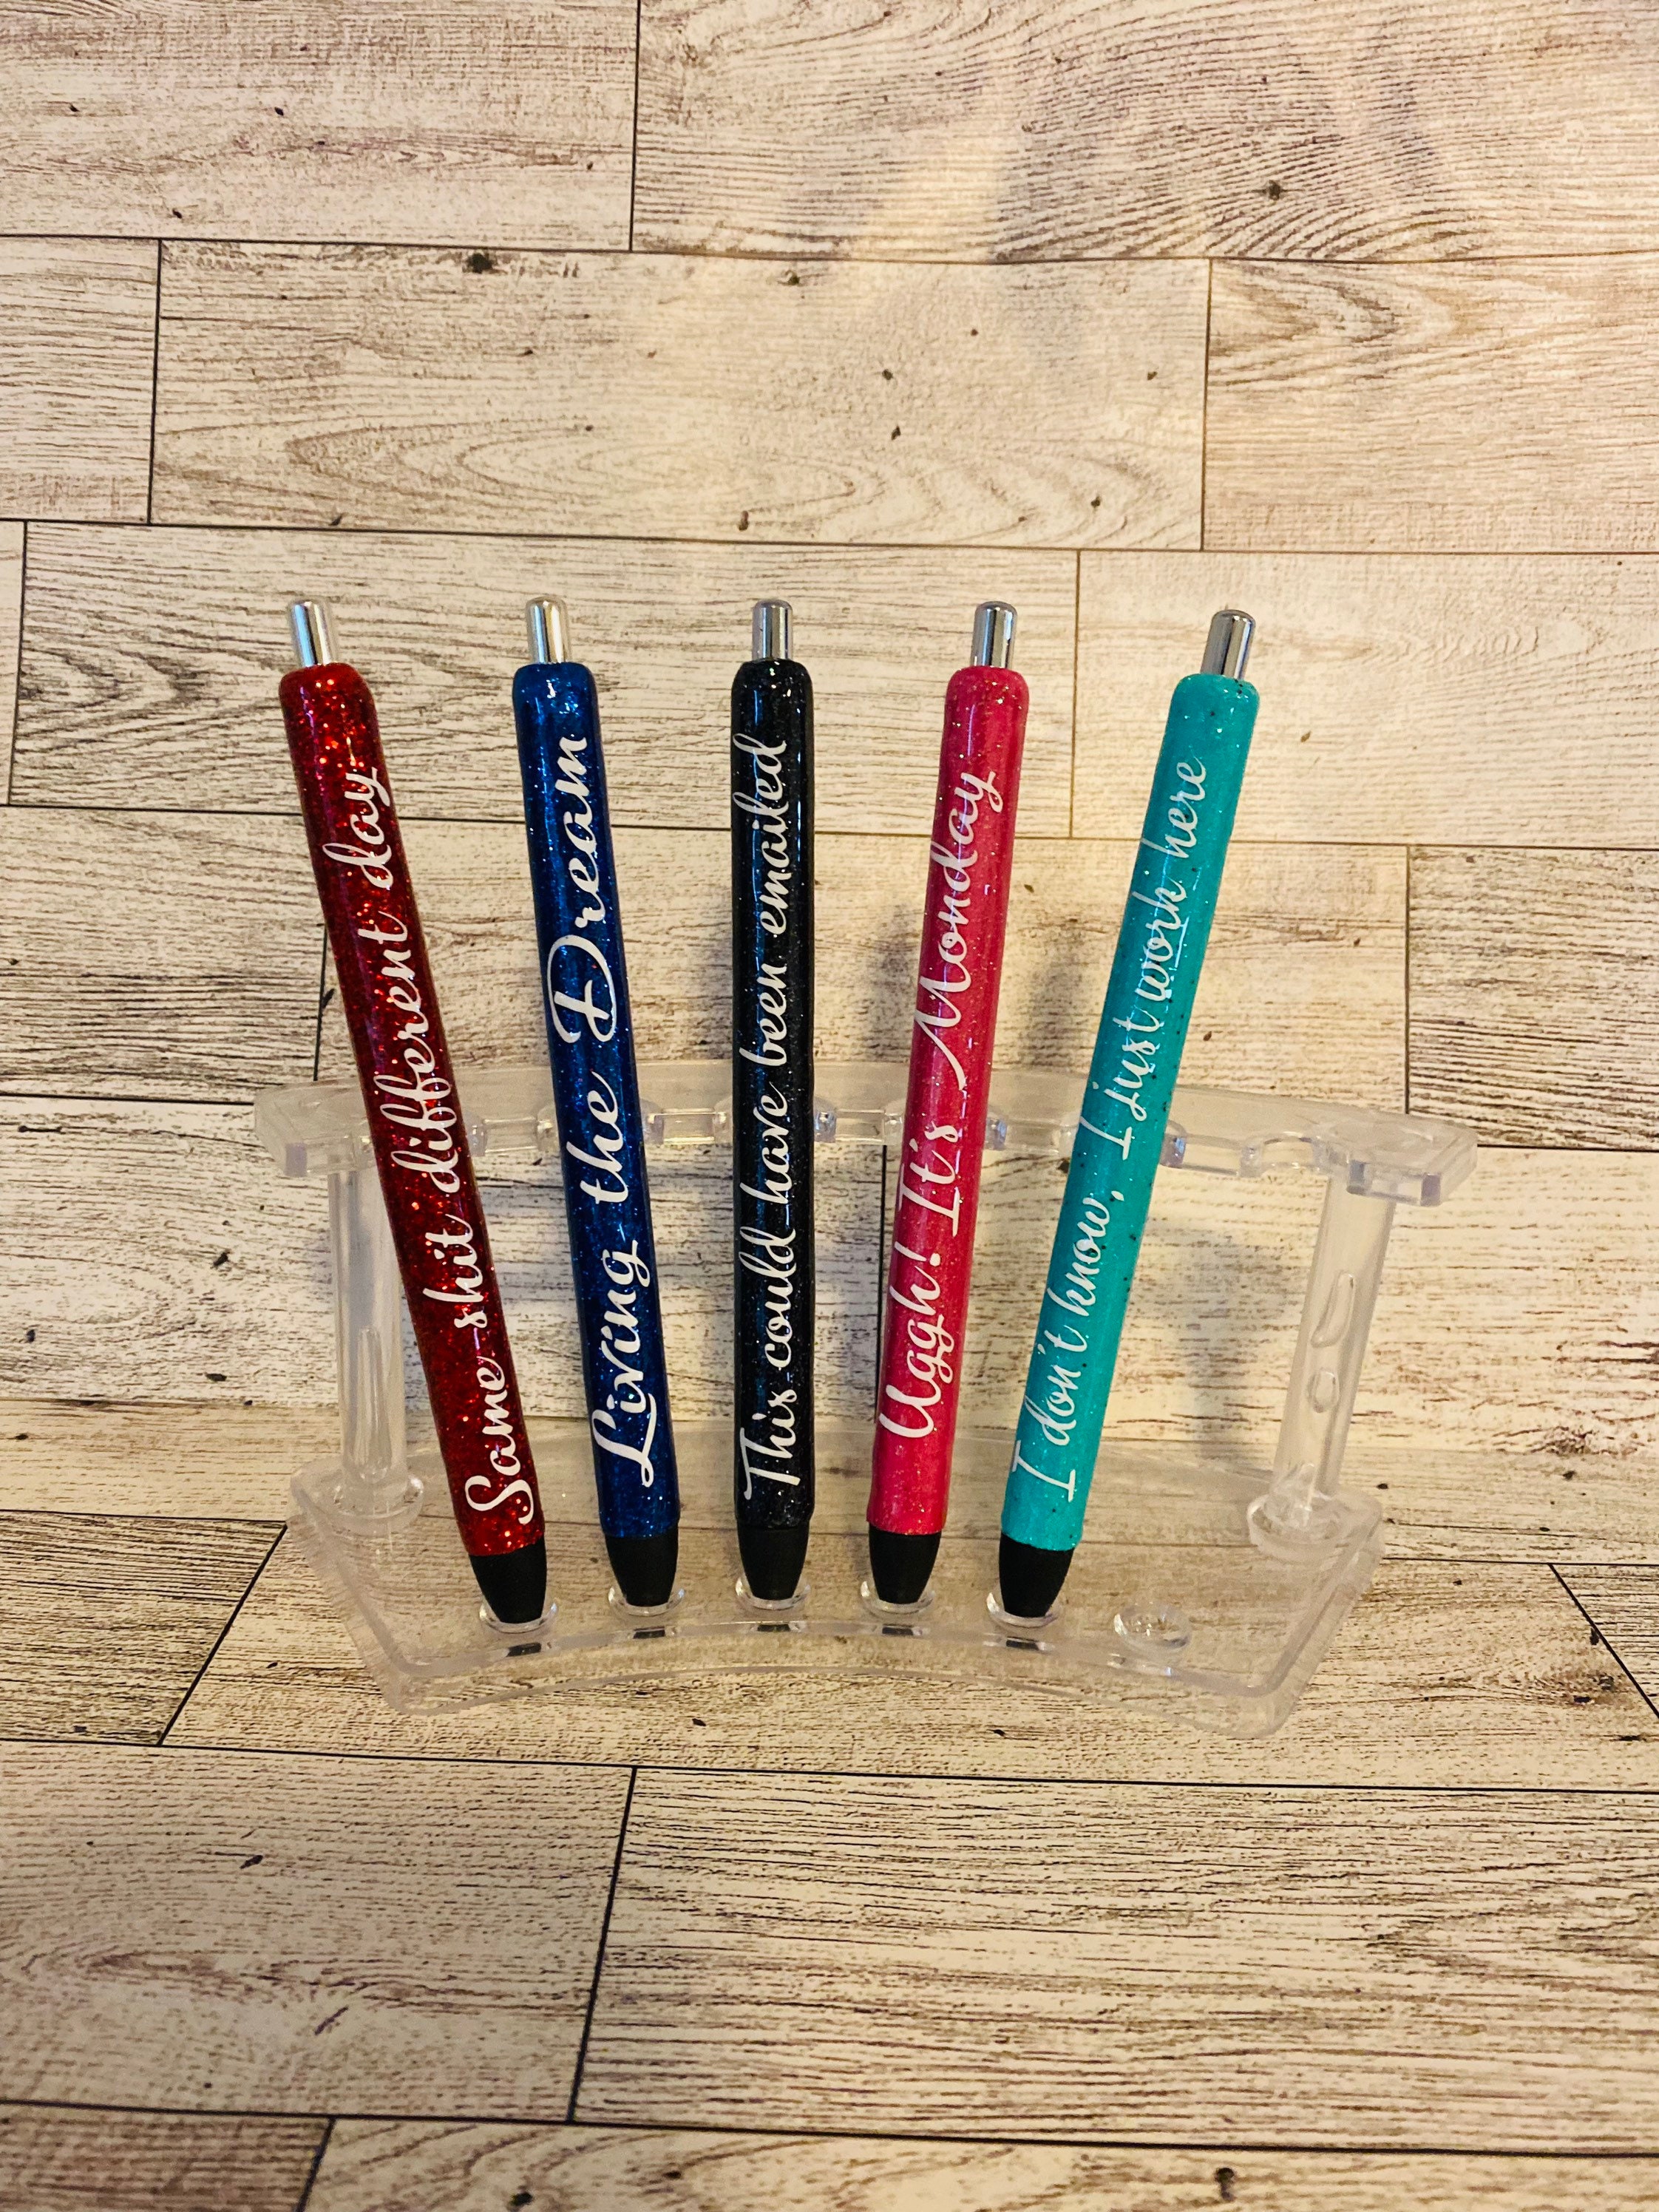 YJ PREMIUMS 9 PC Funny Fun Pens Set for Adults, FK Swear Word Sayings  Ballpoint Pen for Work Office; Funny Gifts for Coworker Friend Colleague  Novelty